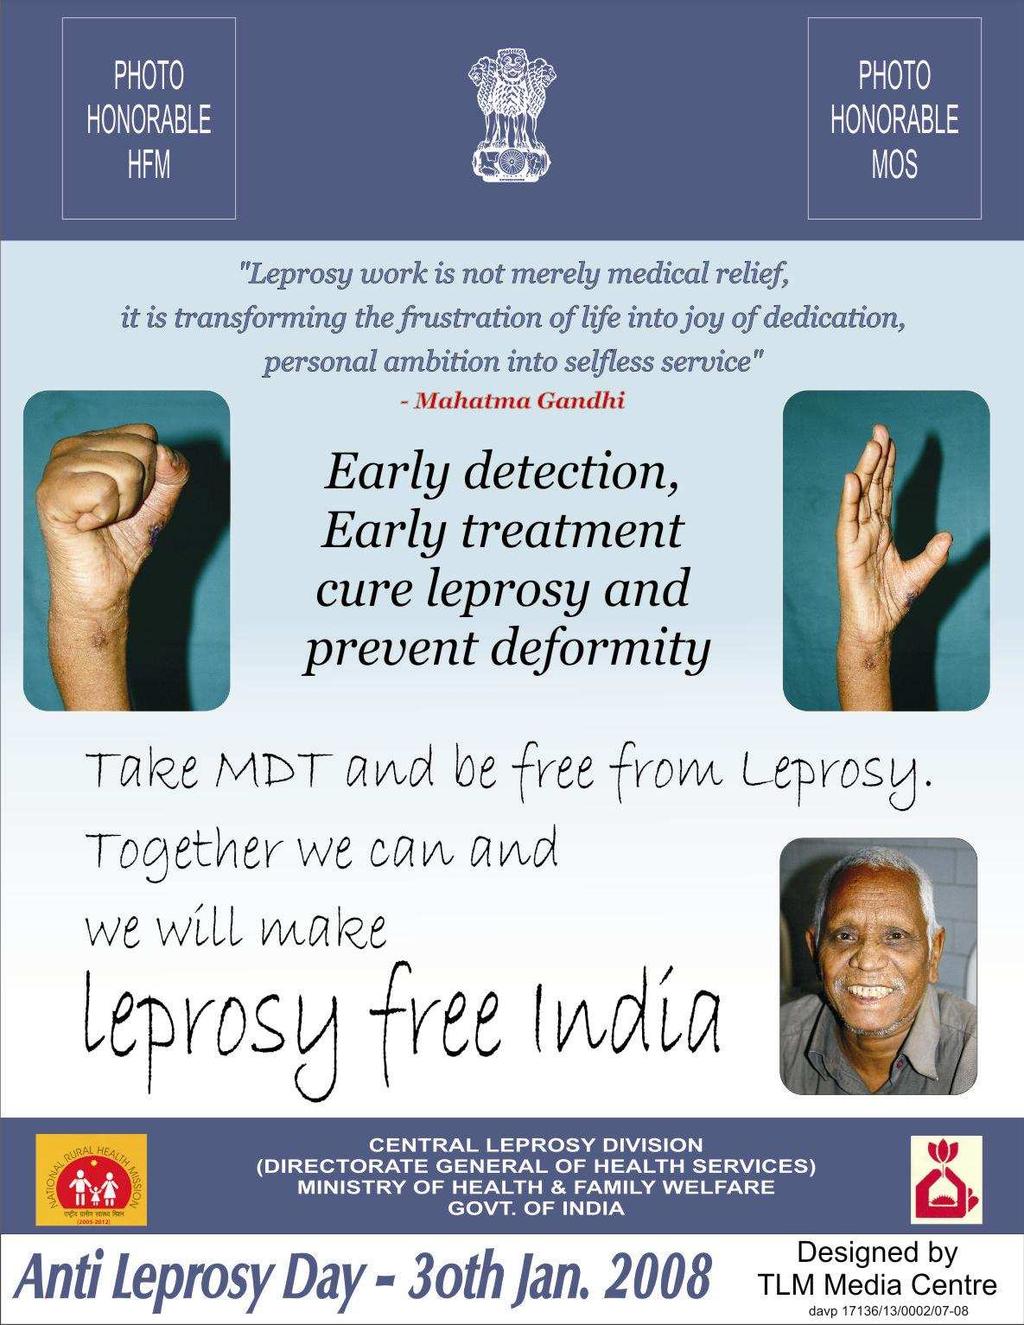 TOWARDS ACHIEVING LEPROSY FREE INDIA Observance of Antileprosy day 30 th Jan 2008 Campaign theme Leprosy Free India - Reduction in stigma and discrimination.